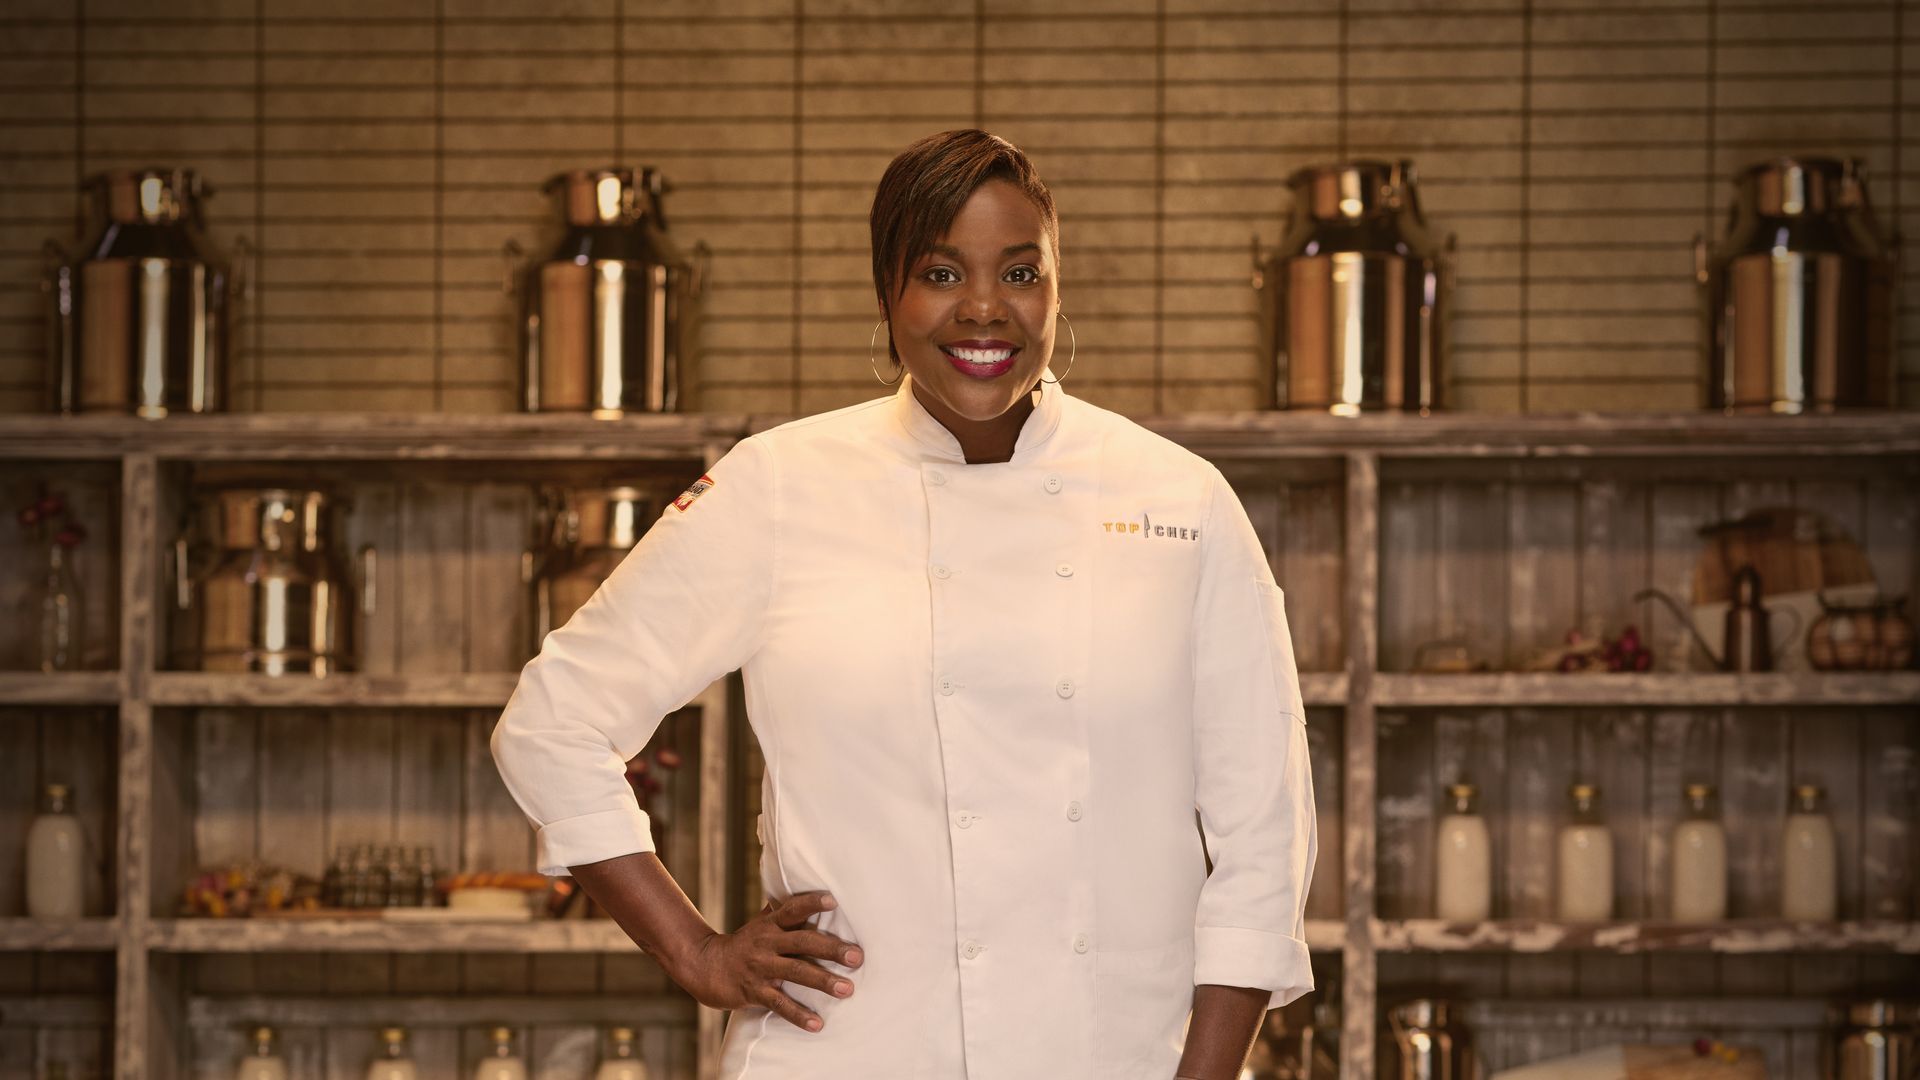 Michelle Wallace wearing a white chef's coat